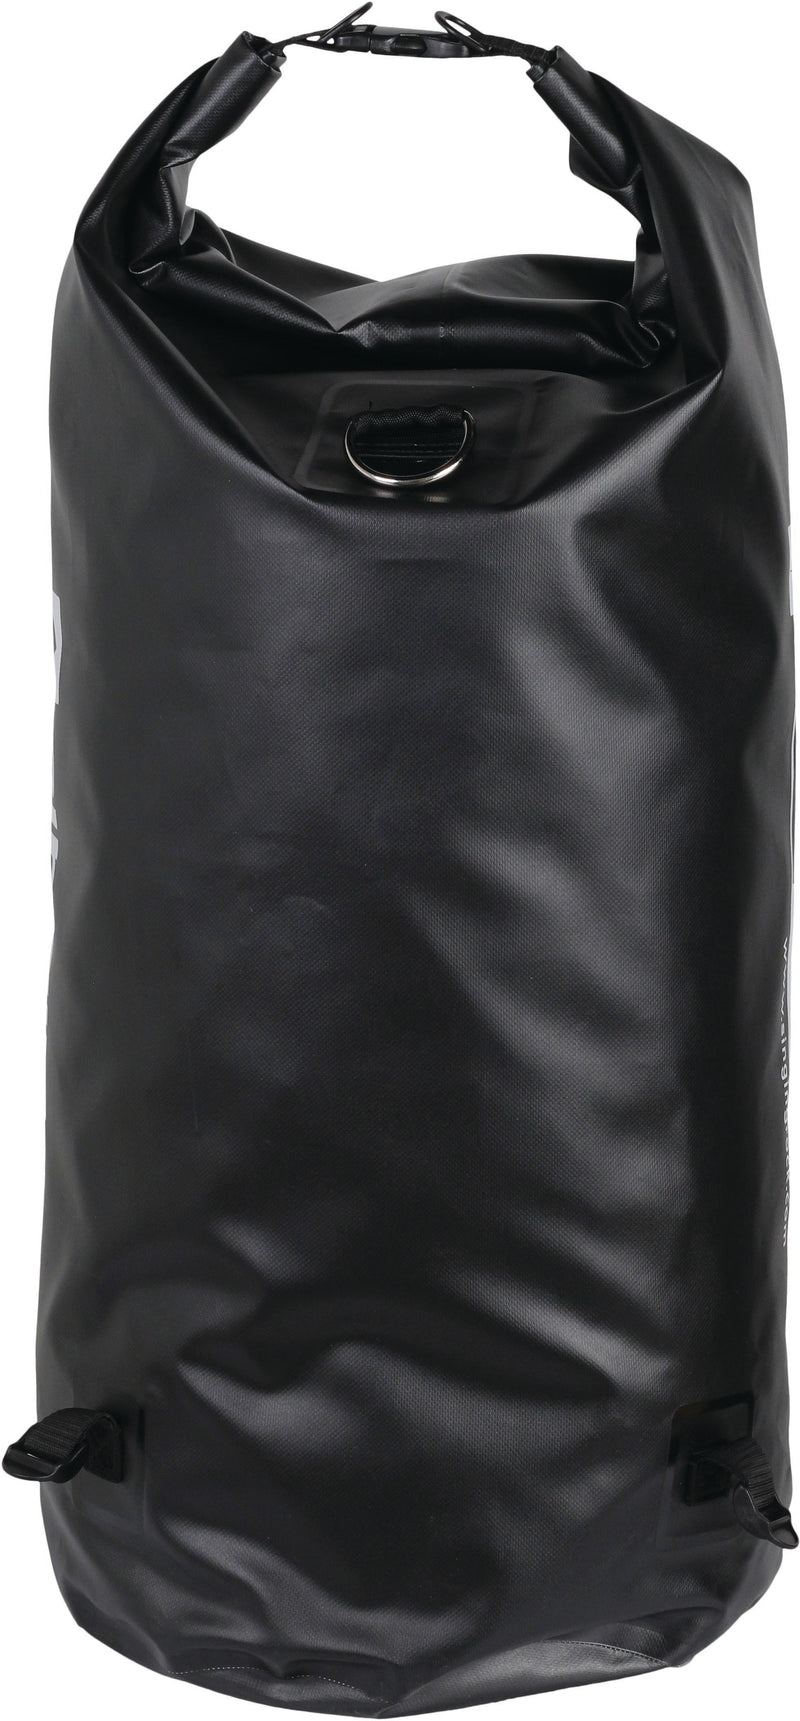 Load image into Gallery viewer, Singing Rock 60L Black Dry Bag - Keep Your Gear Dry and Secure!
